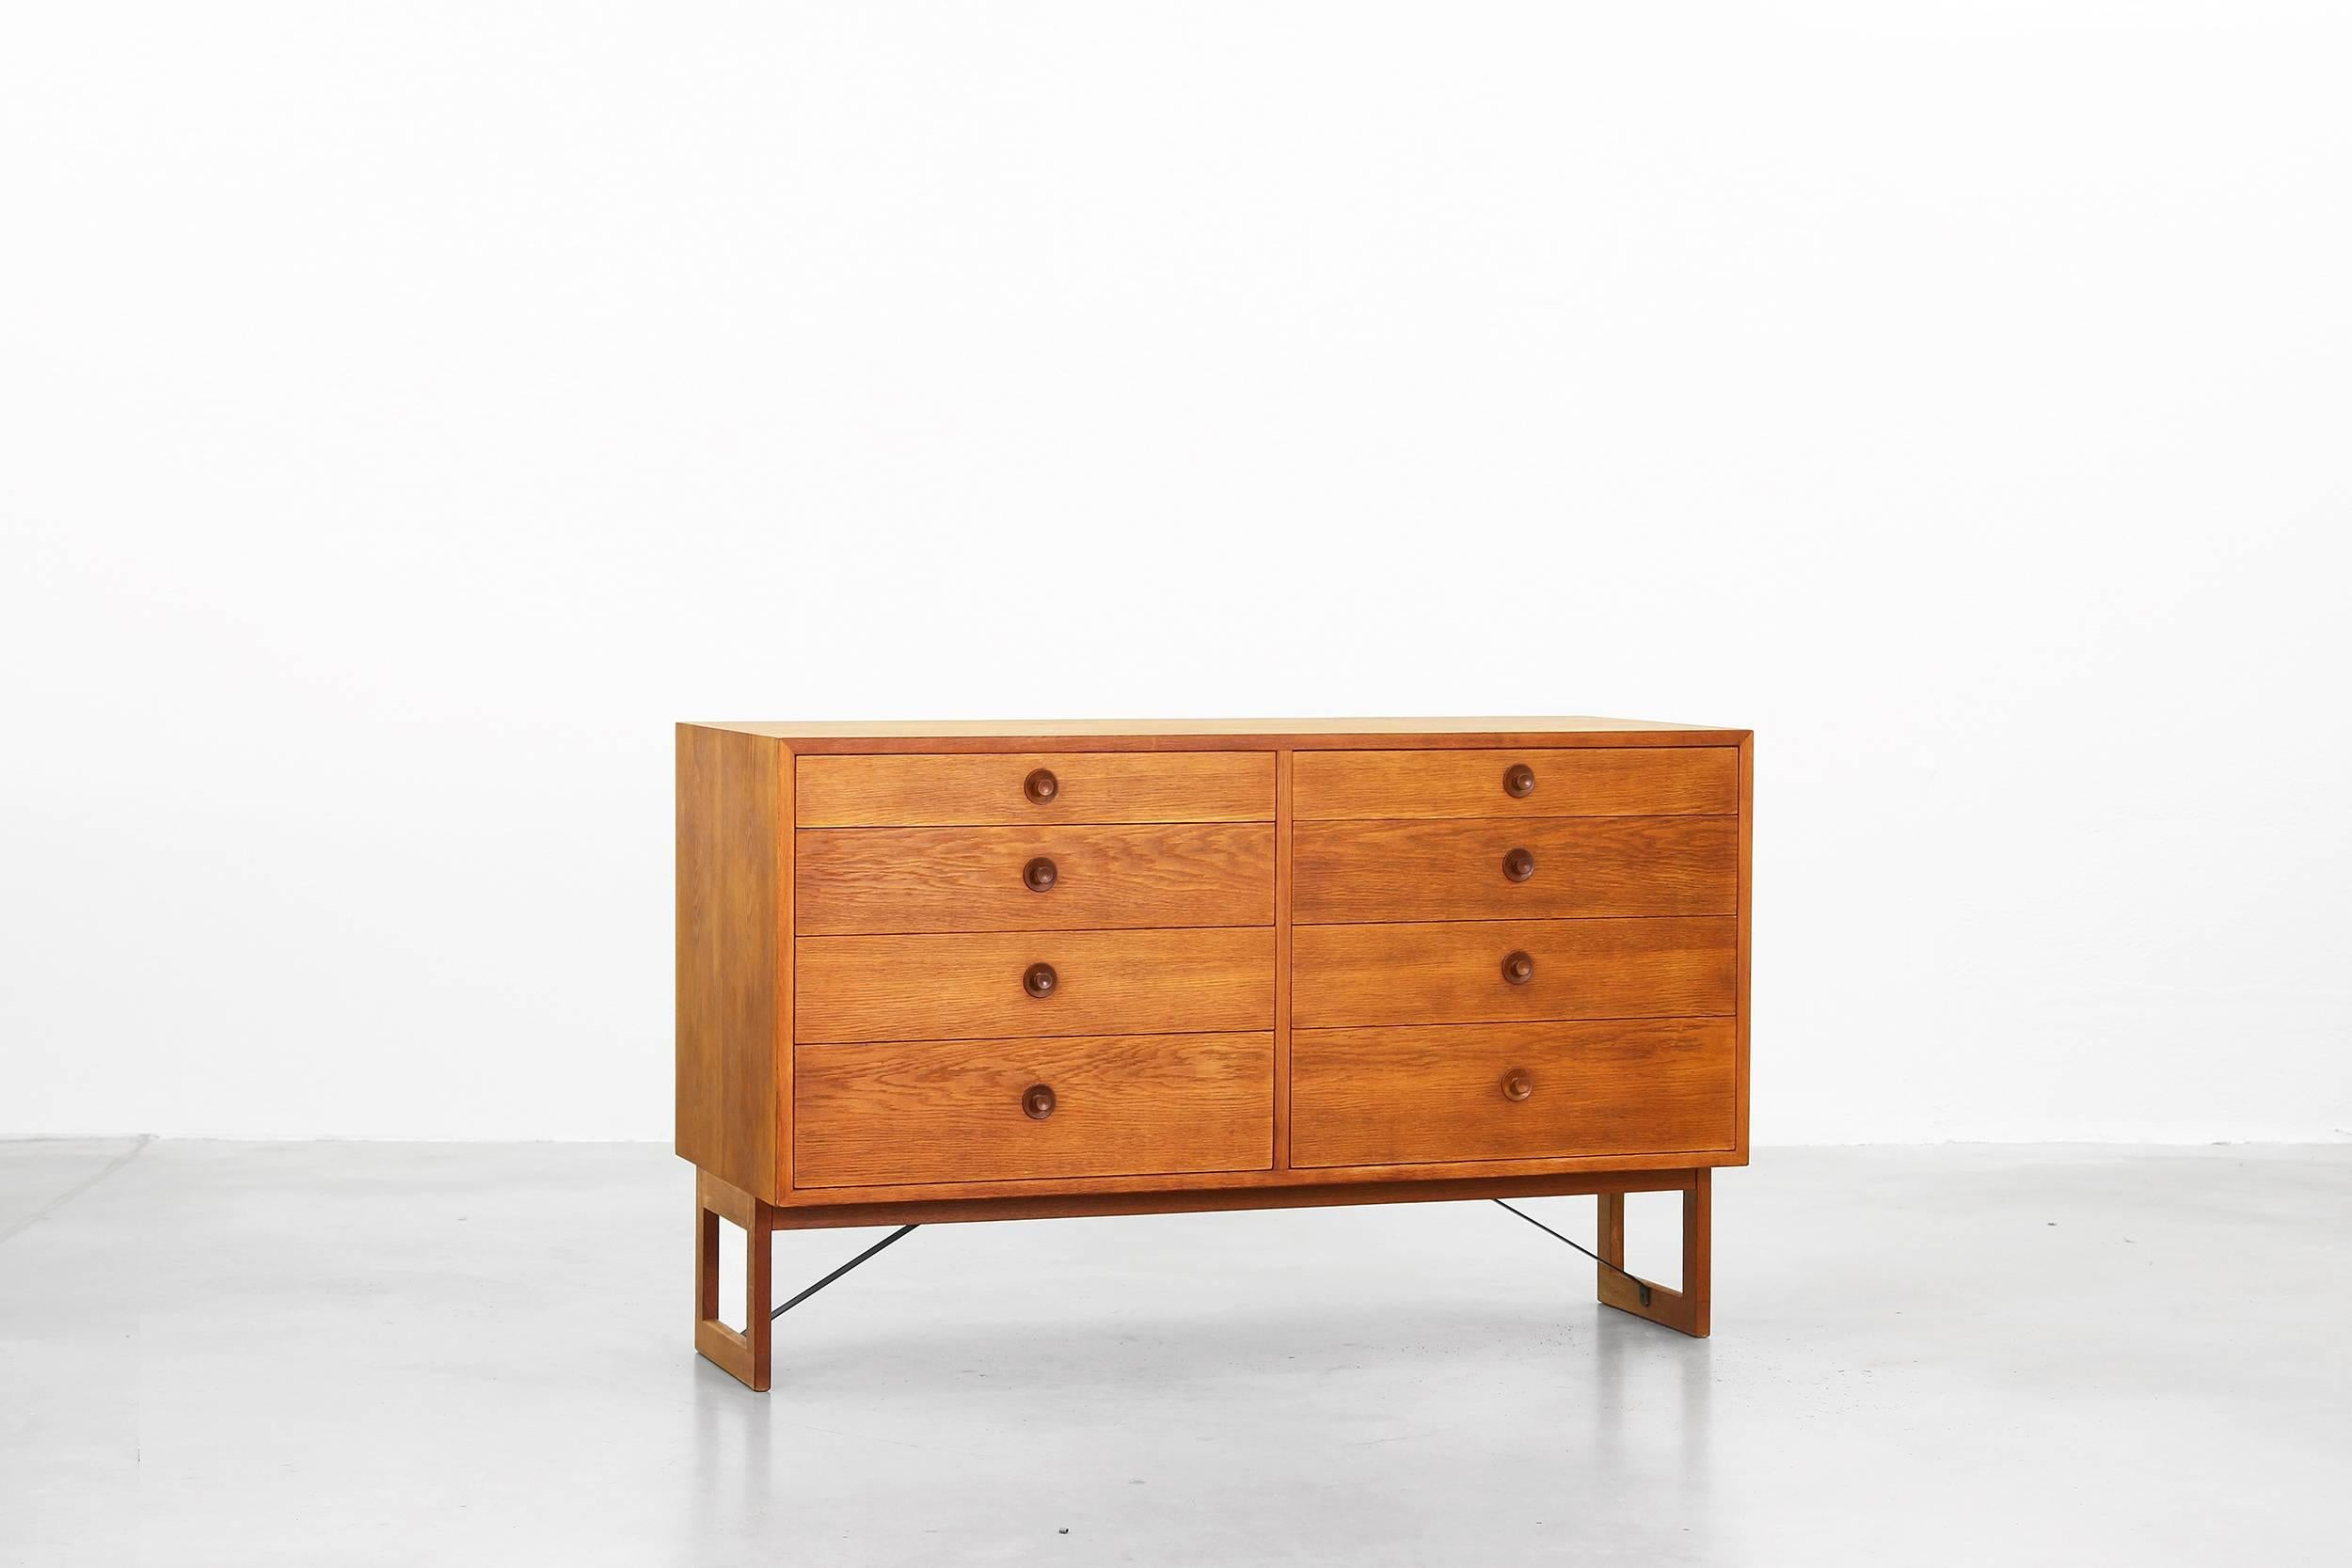 This oak sideboard was designed by Børge Mogensen and produced by Karl Andersson & Söner in Denmark during the 1950s. This piece is still in a very good condition with patinated oak and little traces of usage. Very beautiful and ready for usage.